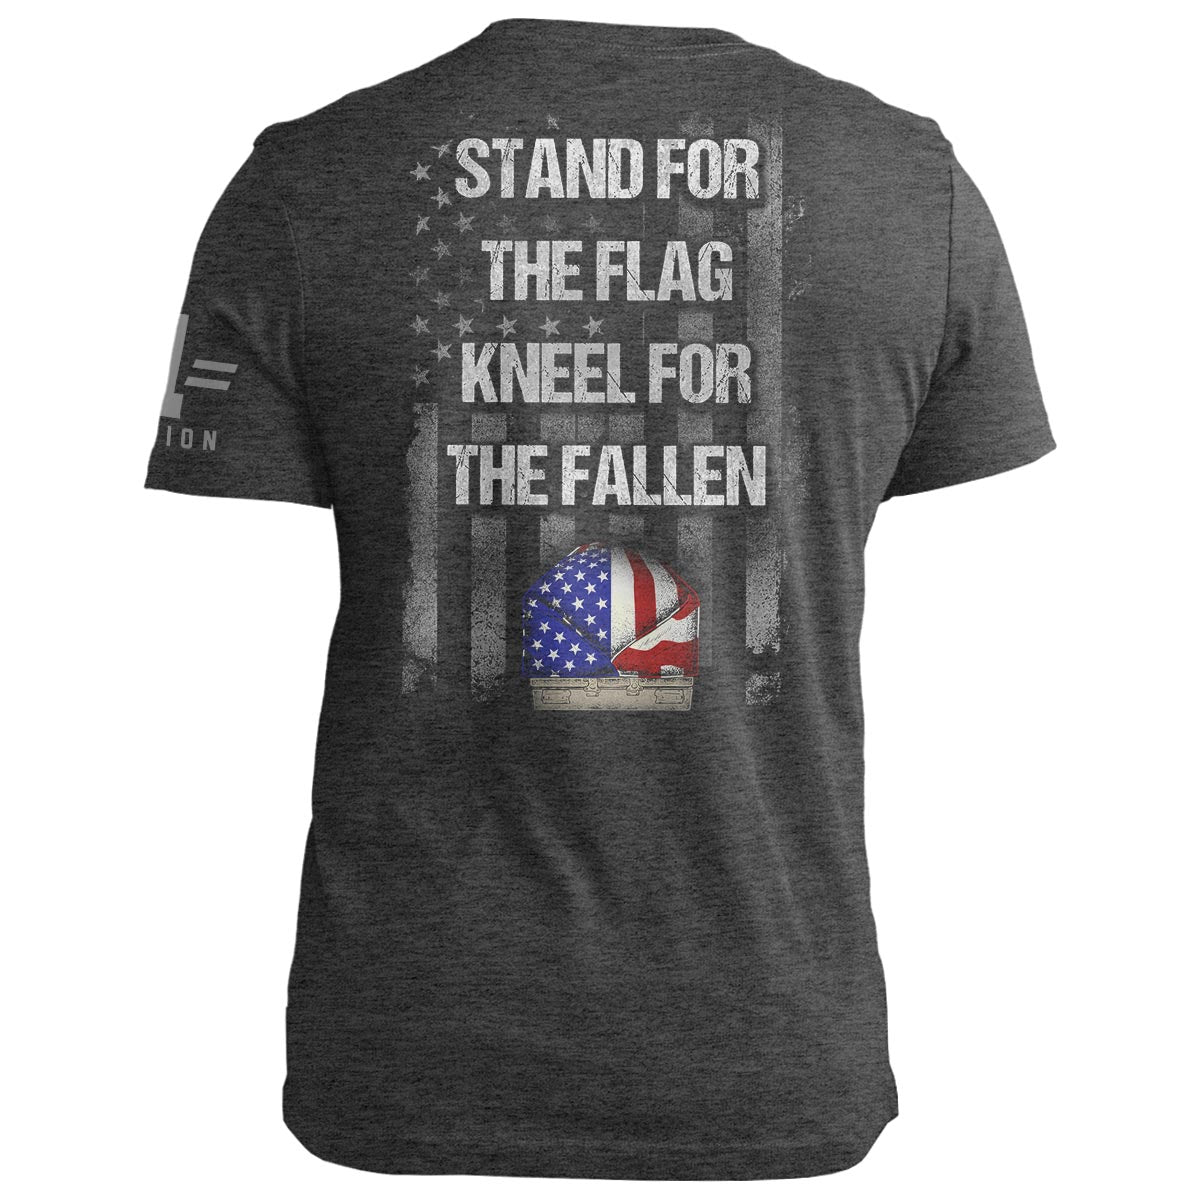 Stand for the flag, Kneel for the fallen